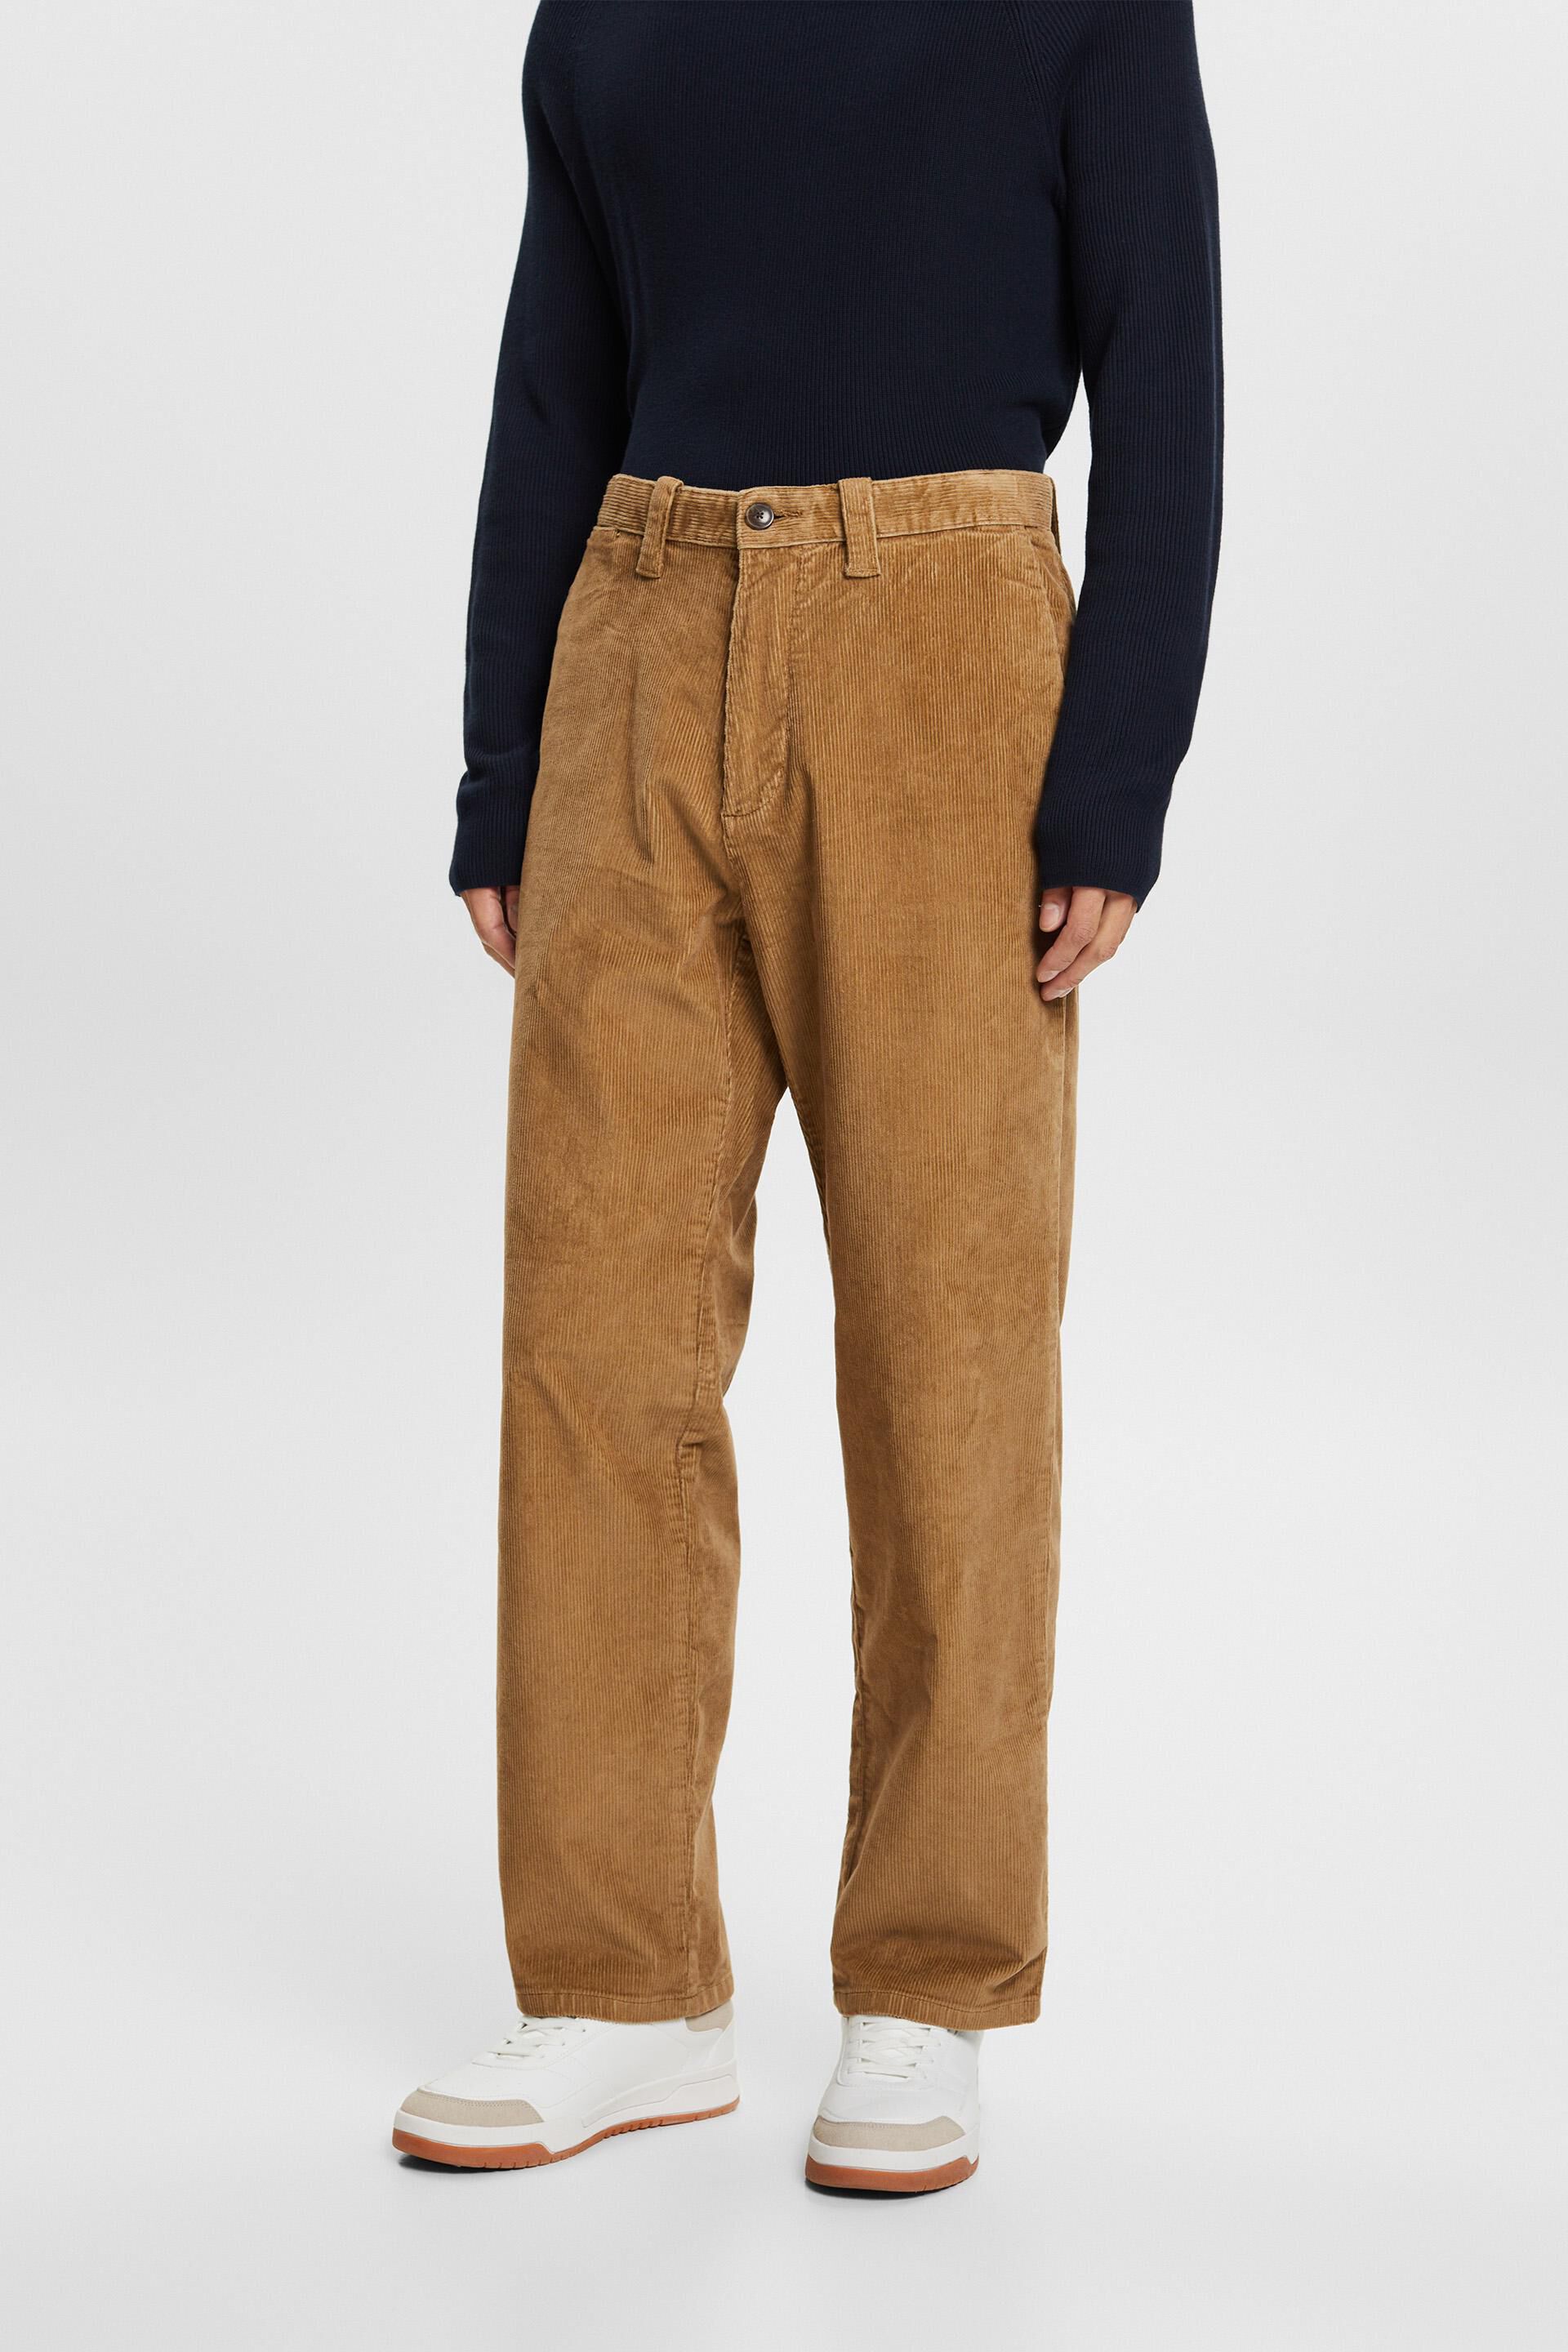 Buy Corduroy Pants For Men In India At Best Prices Online | Tata CLiQ